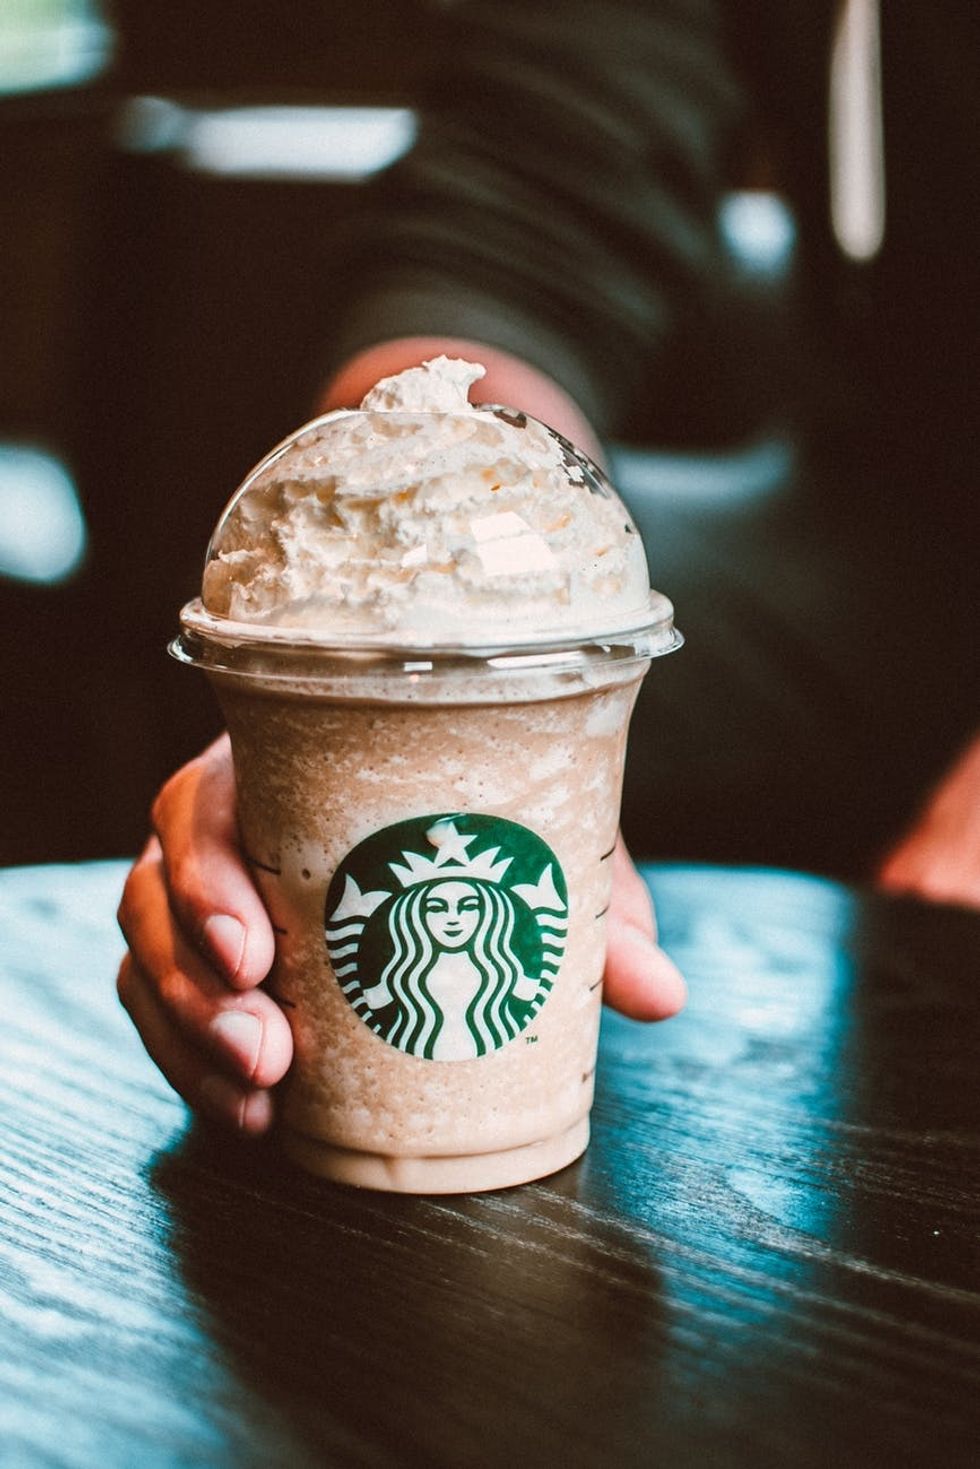 Five Things I Have Learned About People from Working At Starbucks.